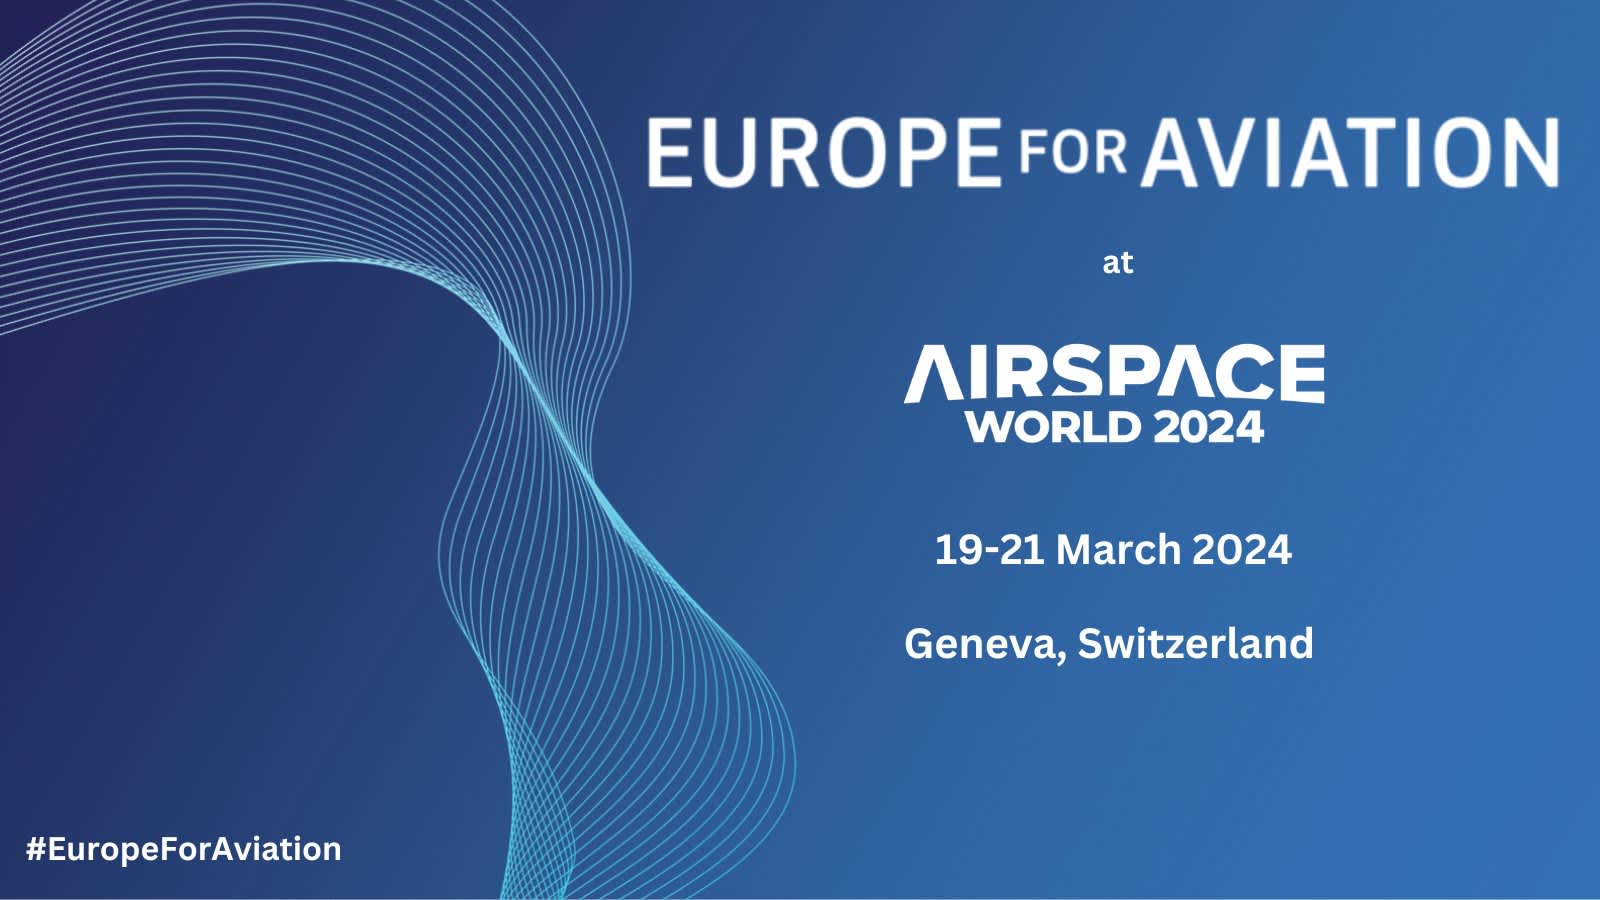 “Europe for Aviation” team up for Airspace World 2024 